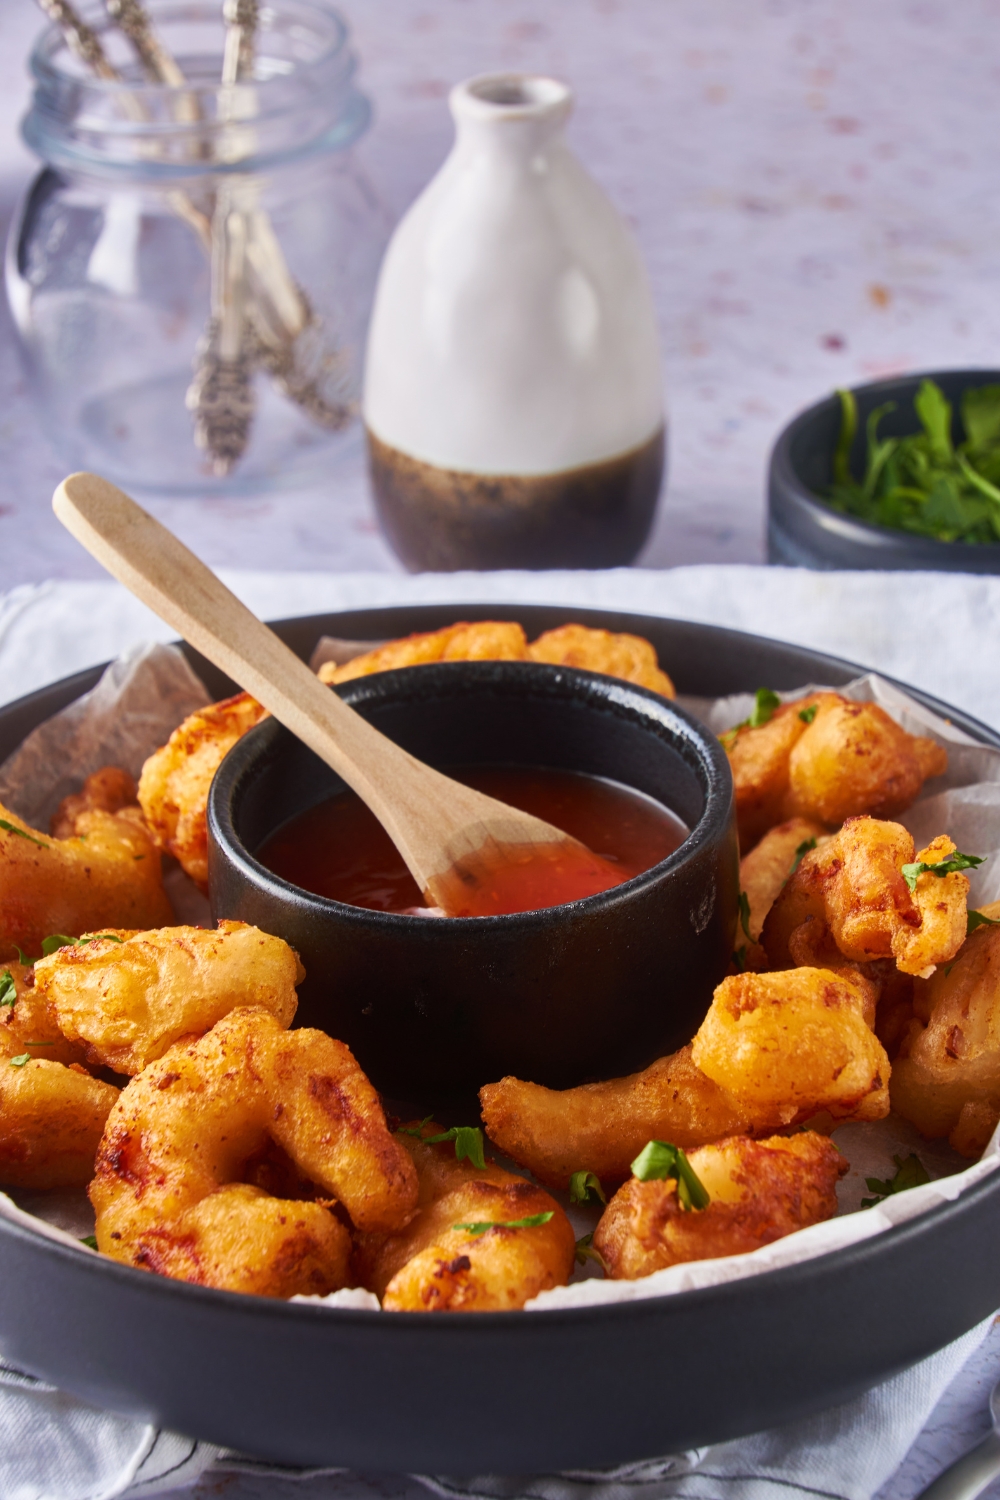 Battered and fried shrimp on a black serving plate garnished with fresh herbs and a bowl of sweet and sour sauce on the plate.